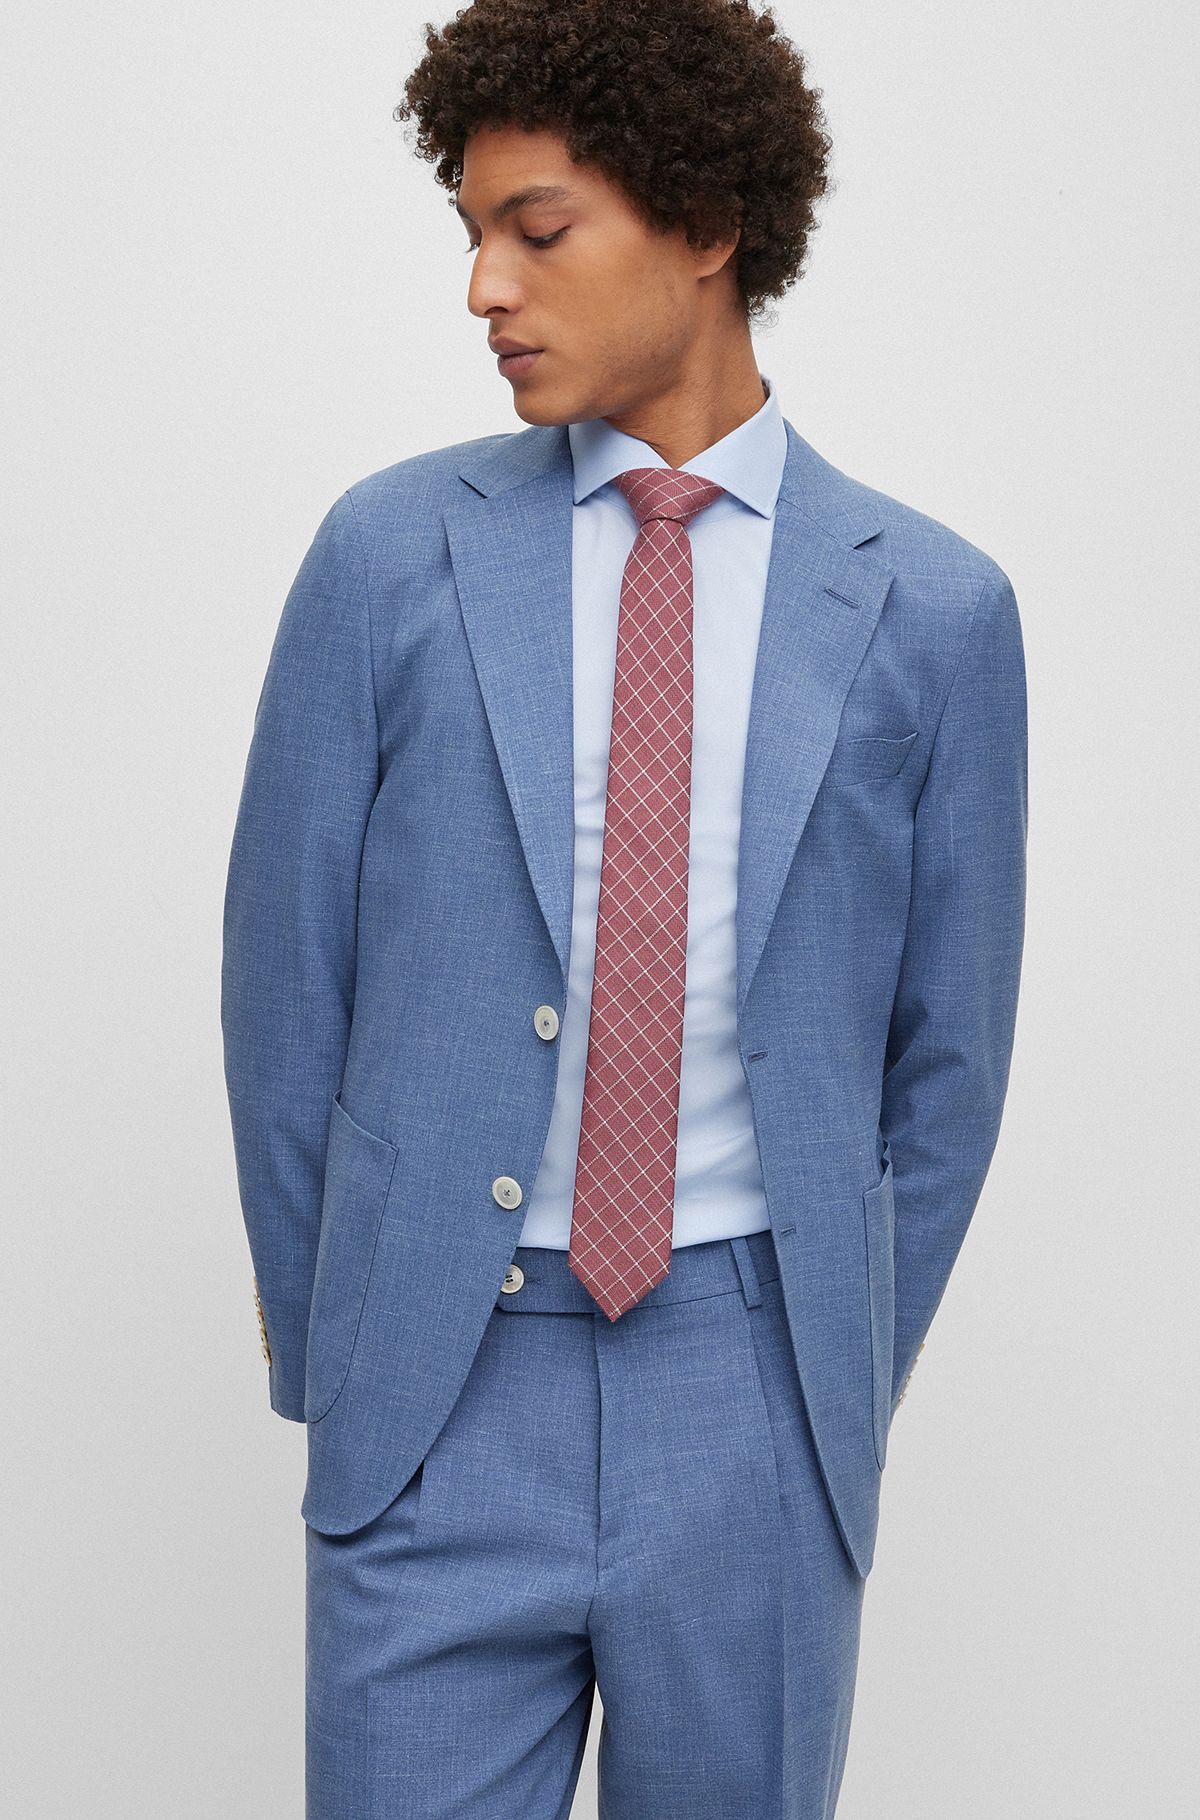 Slim-fit jacket in a micro-patterned wool blend, Blue